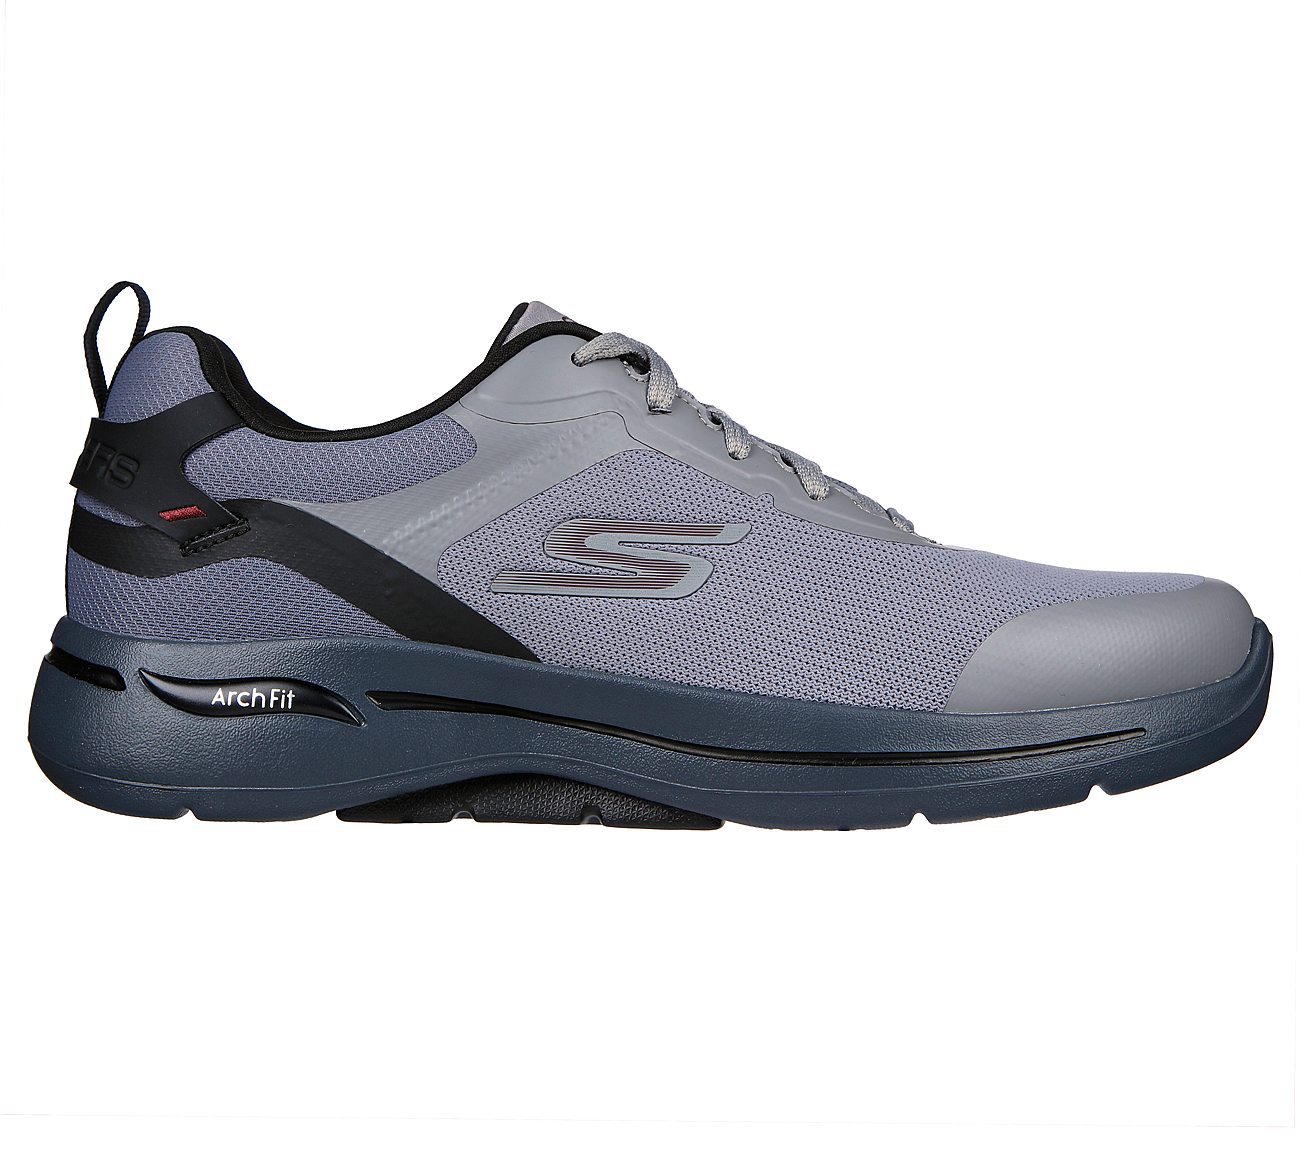 GO WALK ARCH FIT - TERRA, CHARCOAL/BLACK Footwear Lateral View